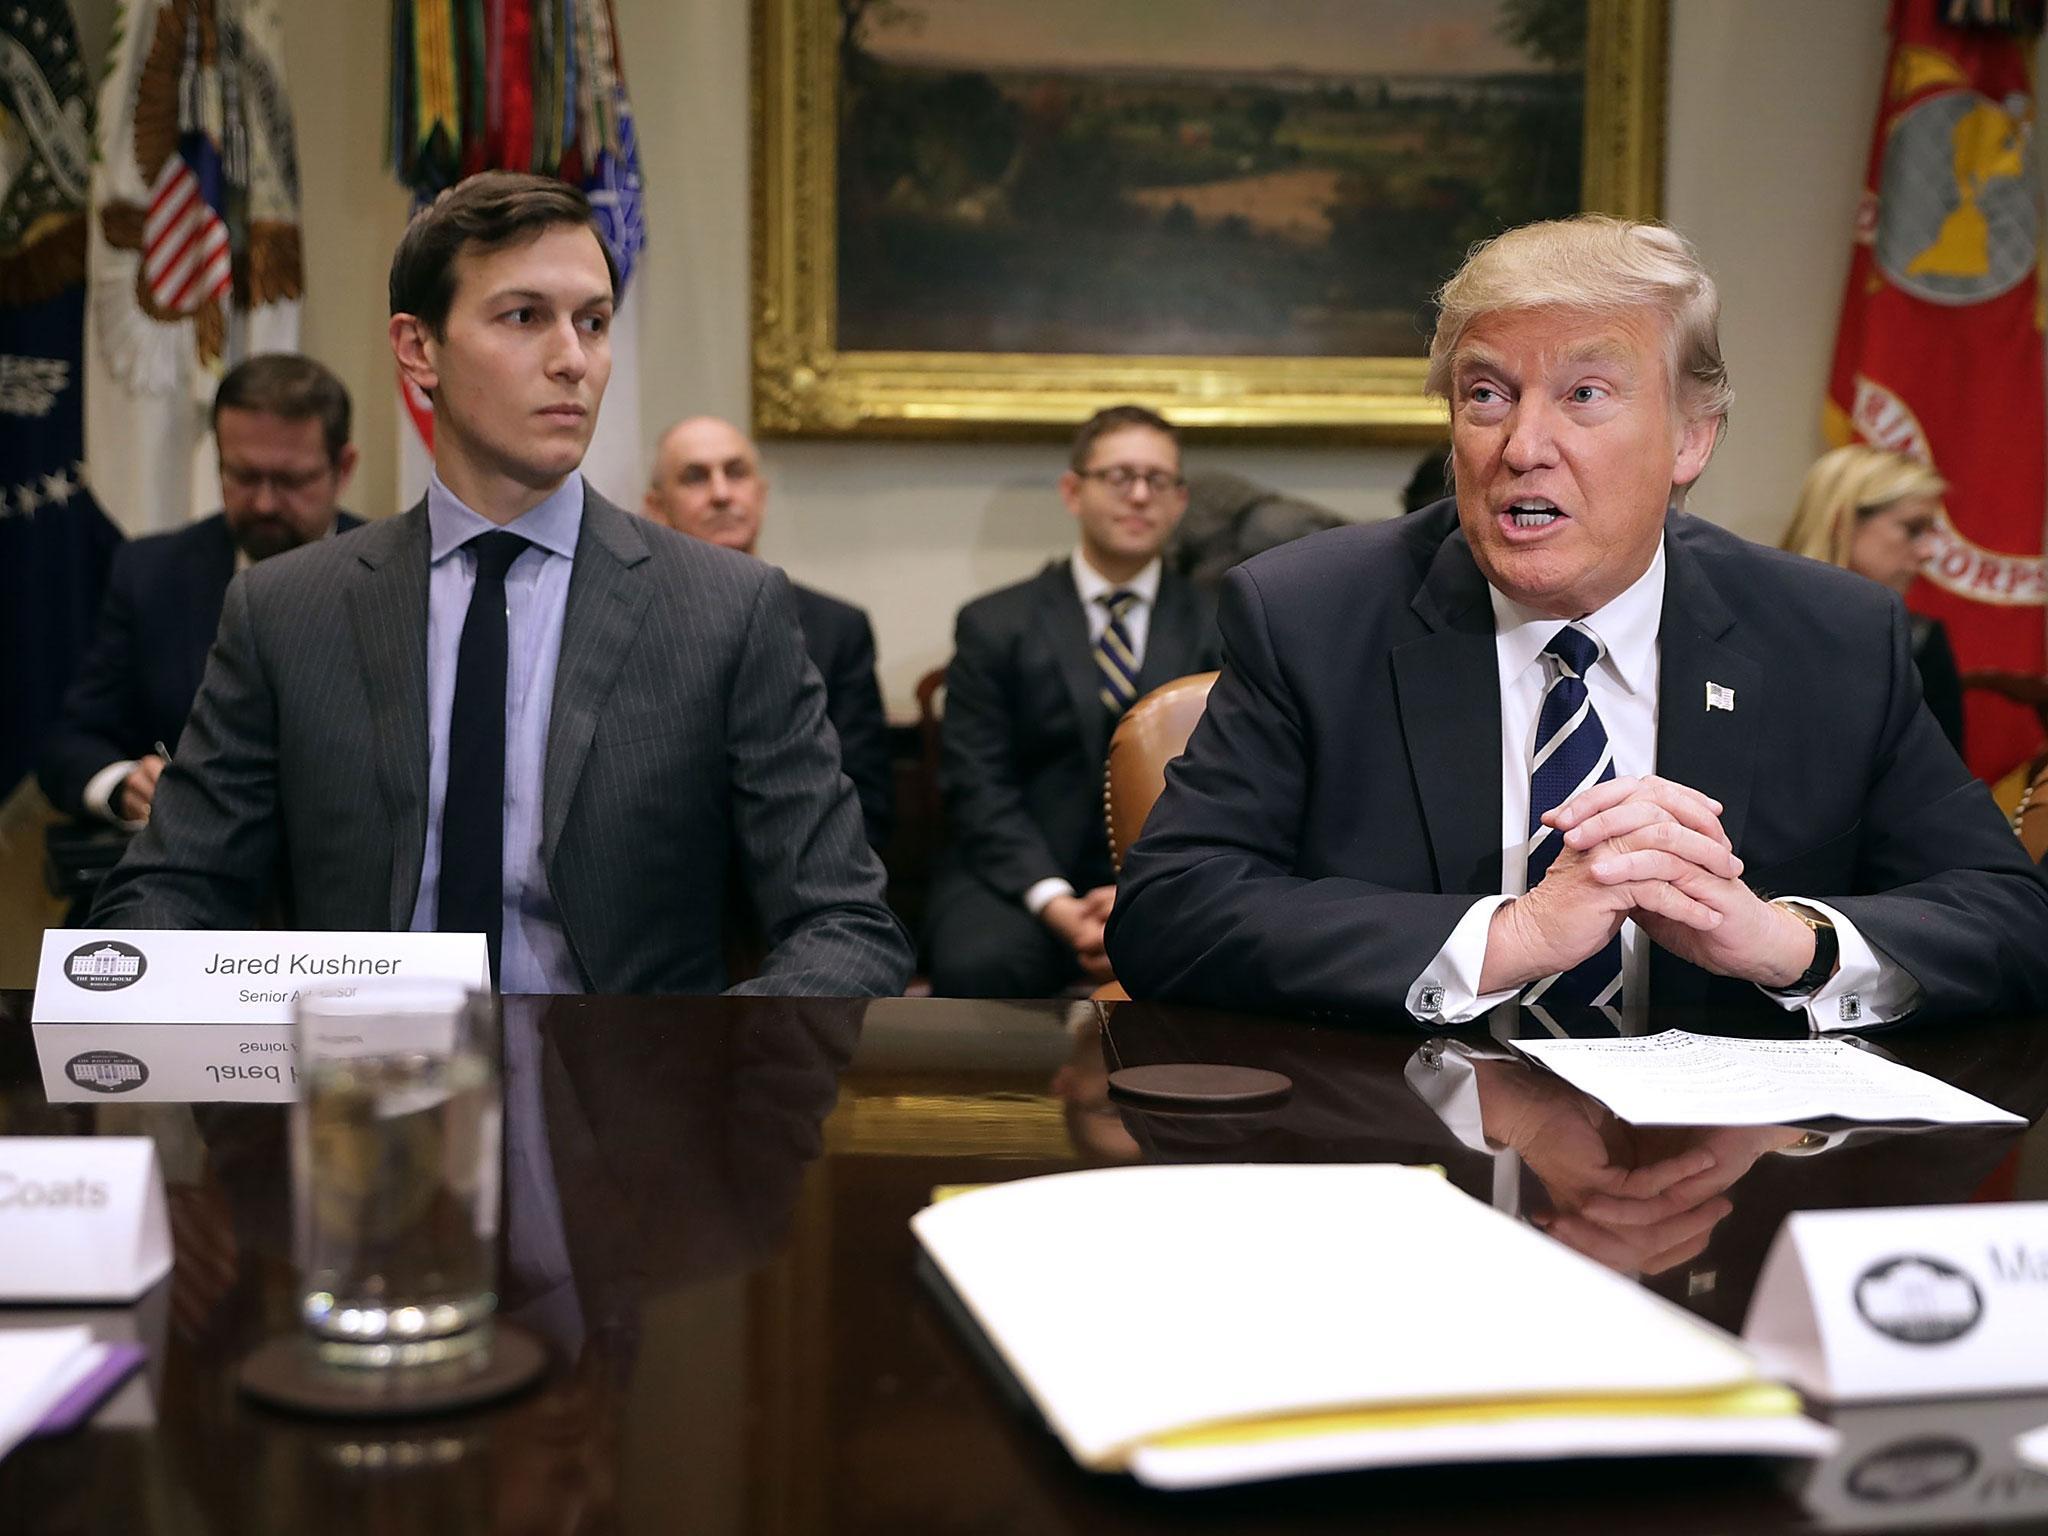 Jared Kushner stepped down as chief executive of Kushner Companies in January and sold stakes in several properties to allay concerns about conflicts of interest while serving as senior adviser to his father-in-law Donald Trump